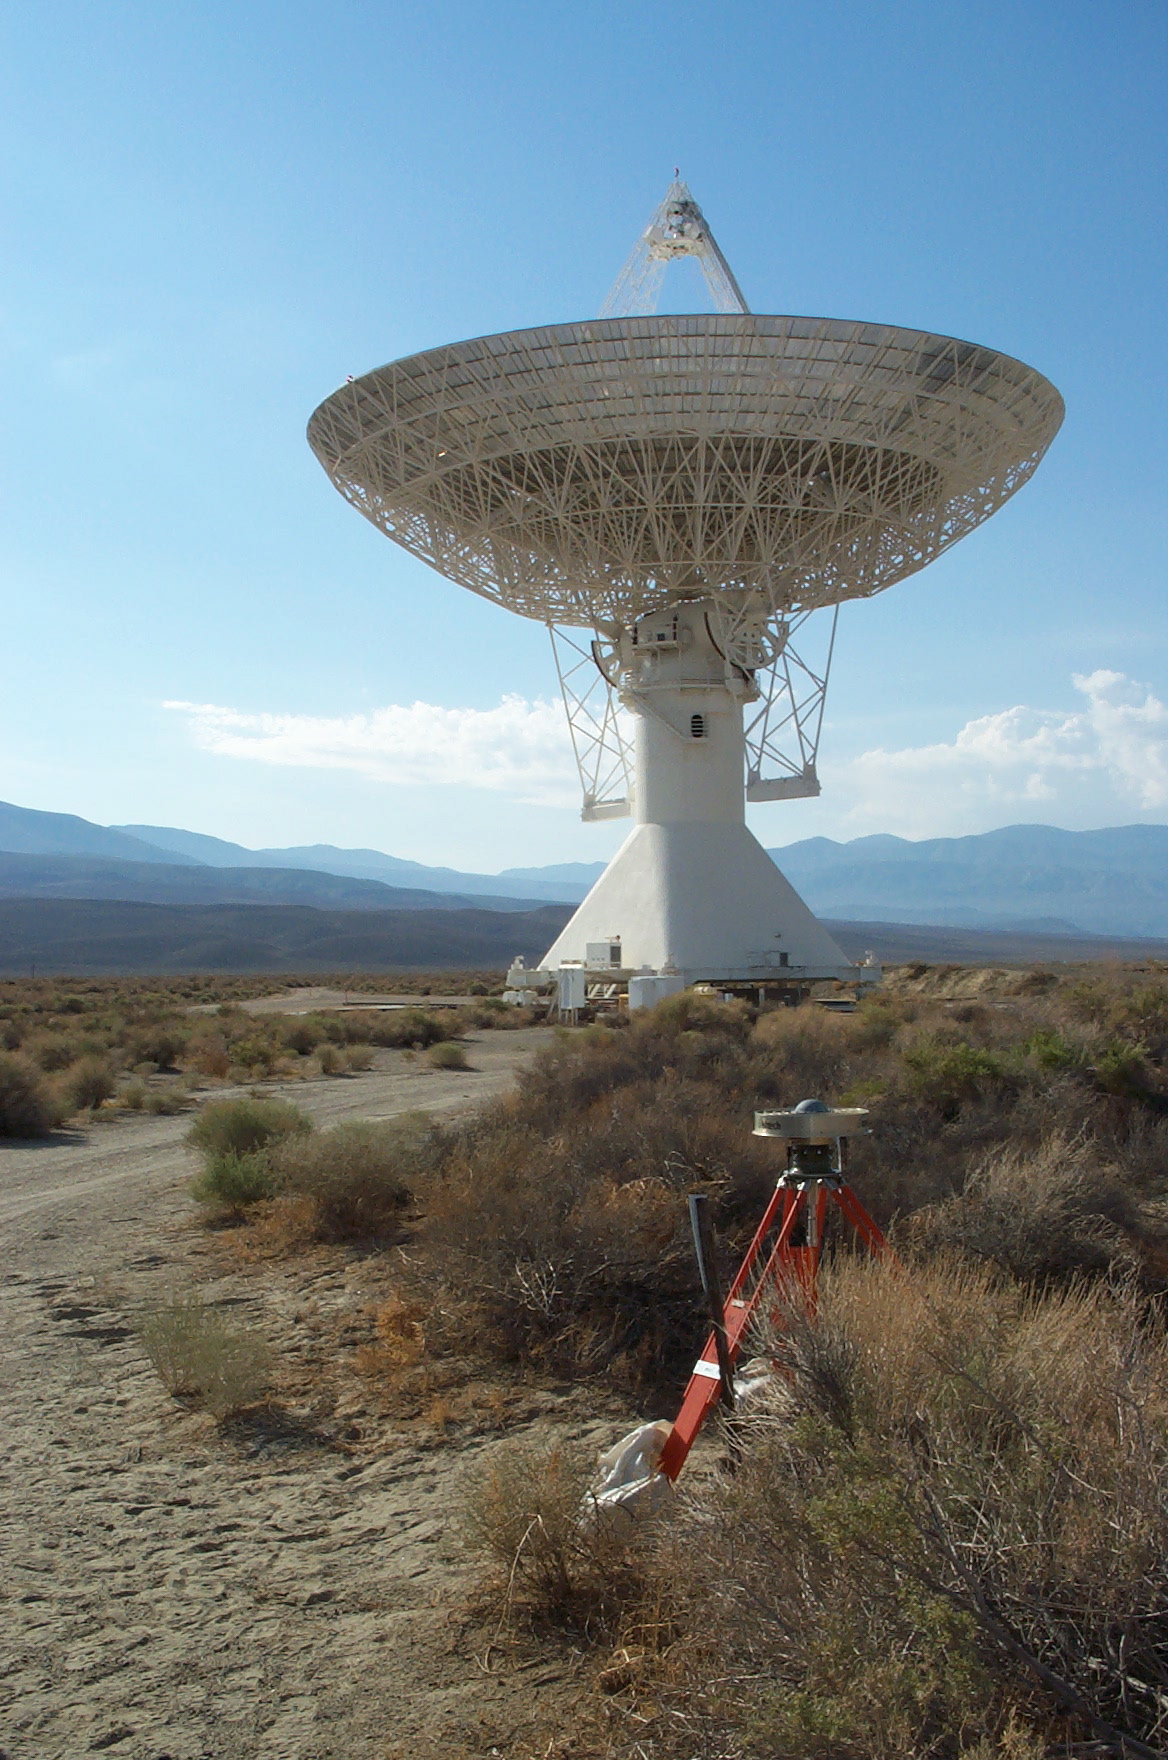 GPS station OVRO. Located at the Owens Valley Radio Observatory near Big Pine, California.